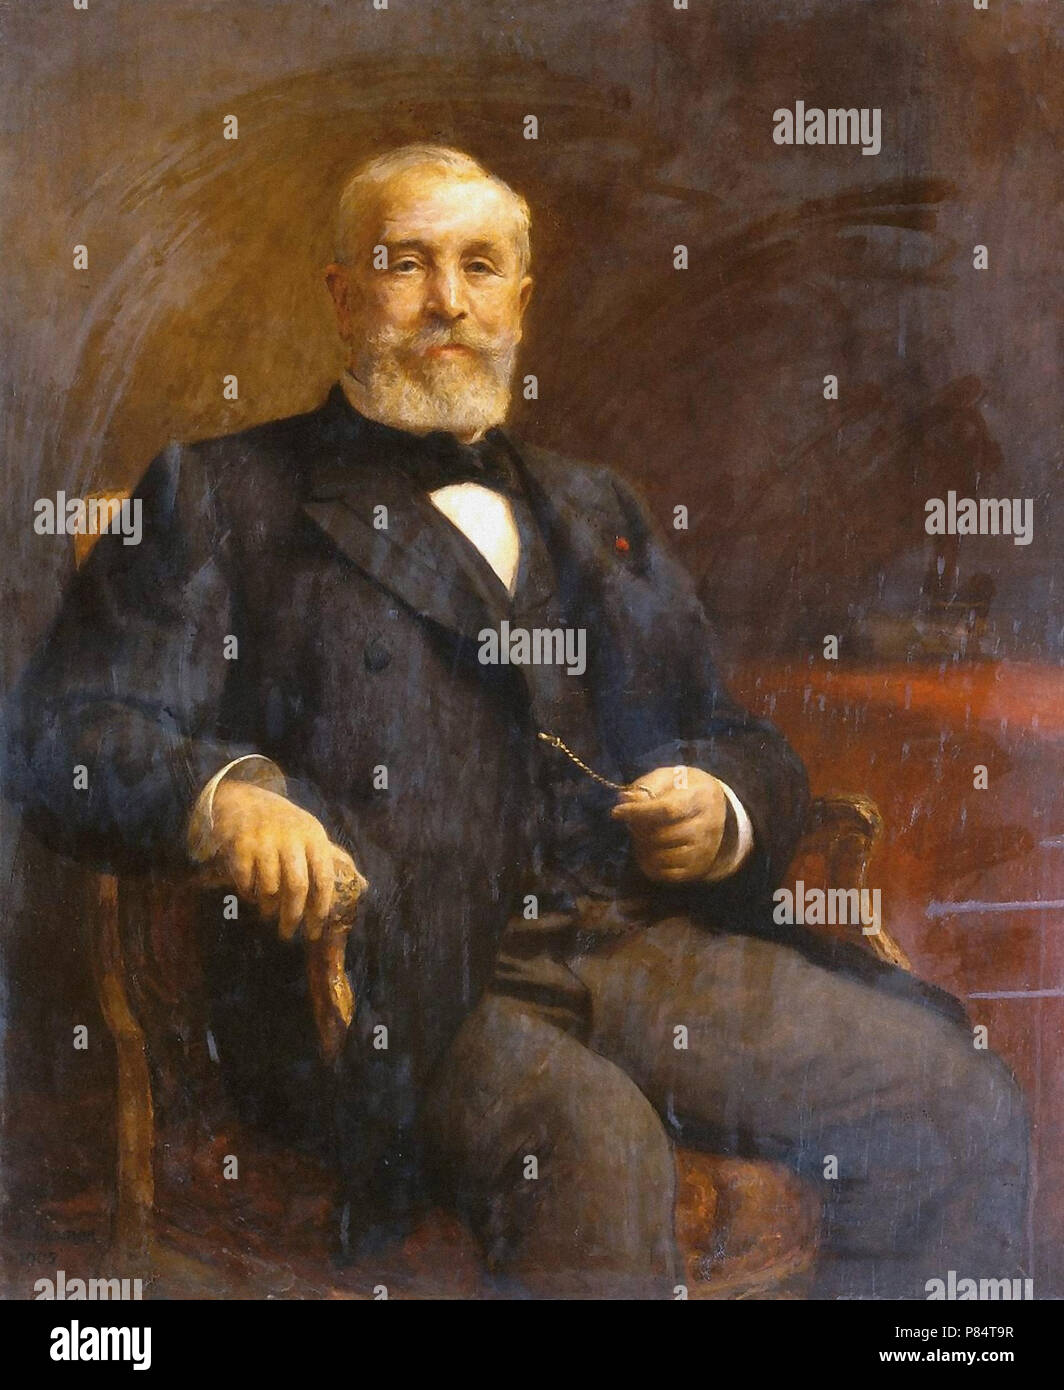 Emile Loubet (1838-1929). President of the French Republic during the Third  Republic. Portrait by Albert Lambert (1854-?), 1905, after a painting by  Fernand Cormon (1845-1924) from the Musee Orsay, Paris. National Art